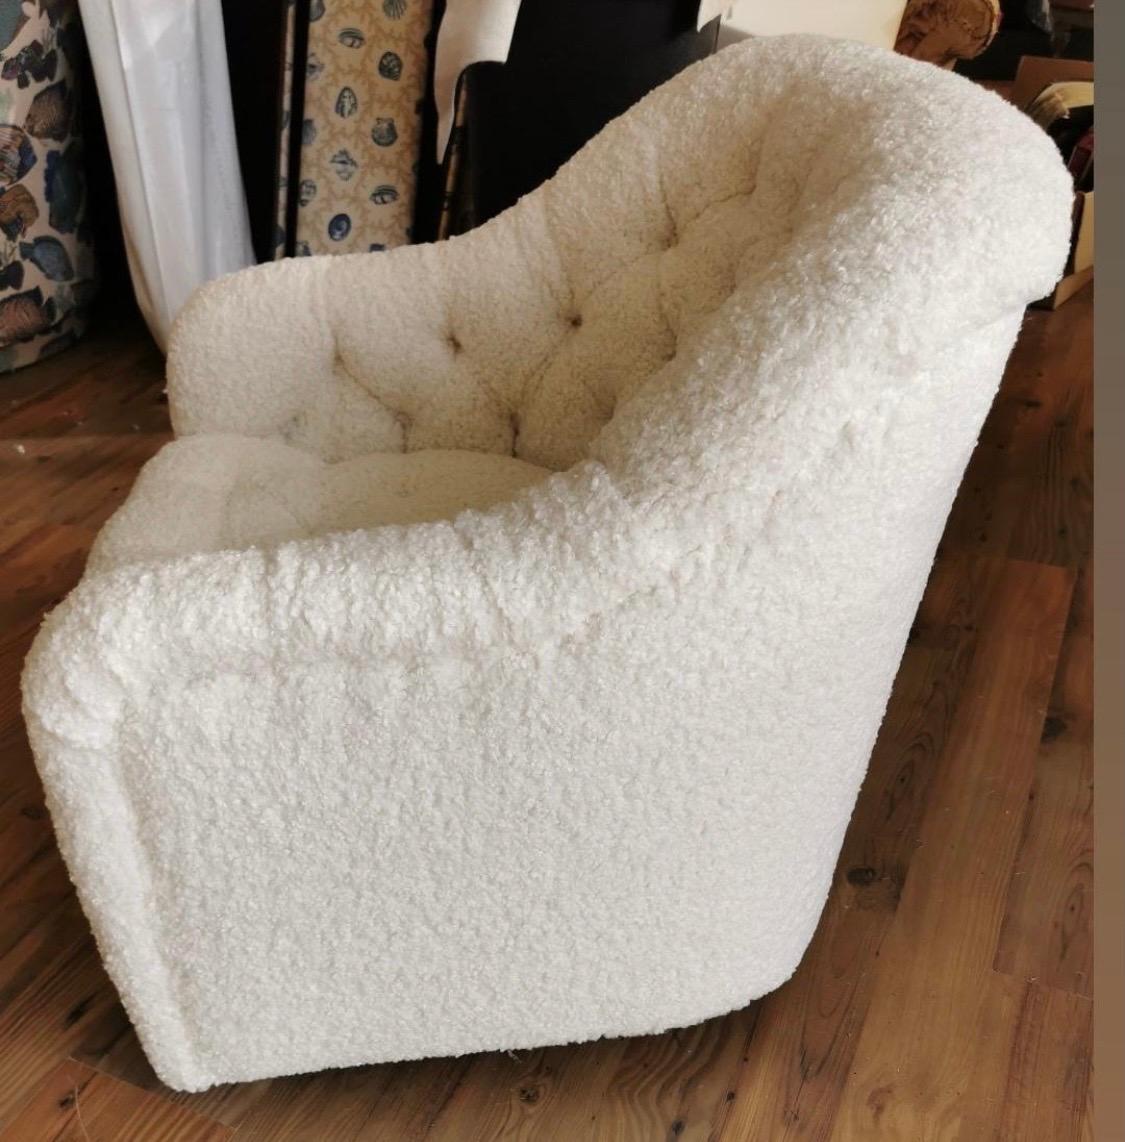 Pair of iconic lounge chairs for Brickel Associates. Tufted lounge or club chairs newly reupholstered in a luxurious faux shearling fabric. Great lines and better scale. Features curved armrests
that promote comfort as well as coiled spring